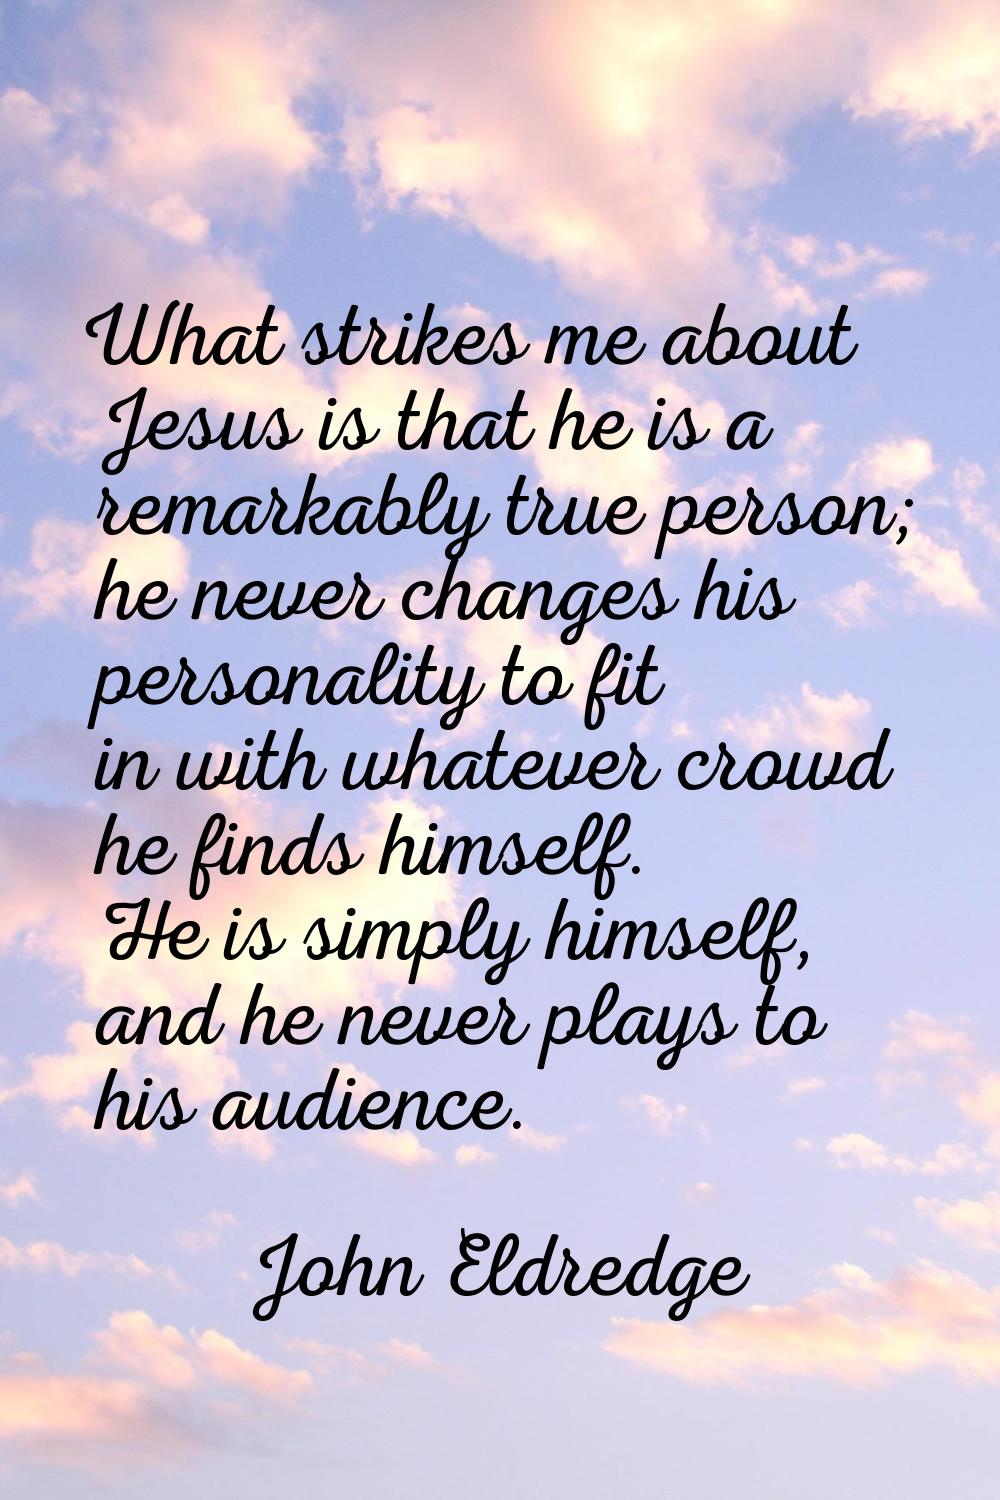 What strikes me about Jesus is that he is a remarkably true person; he never changes his personalit